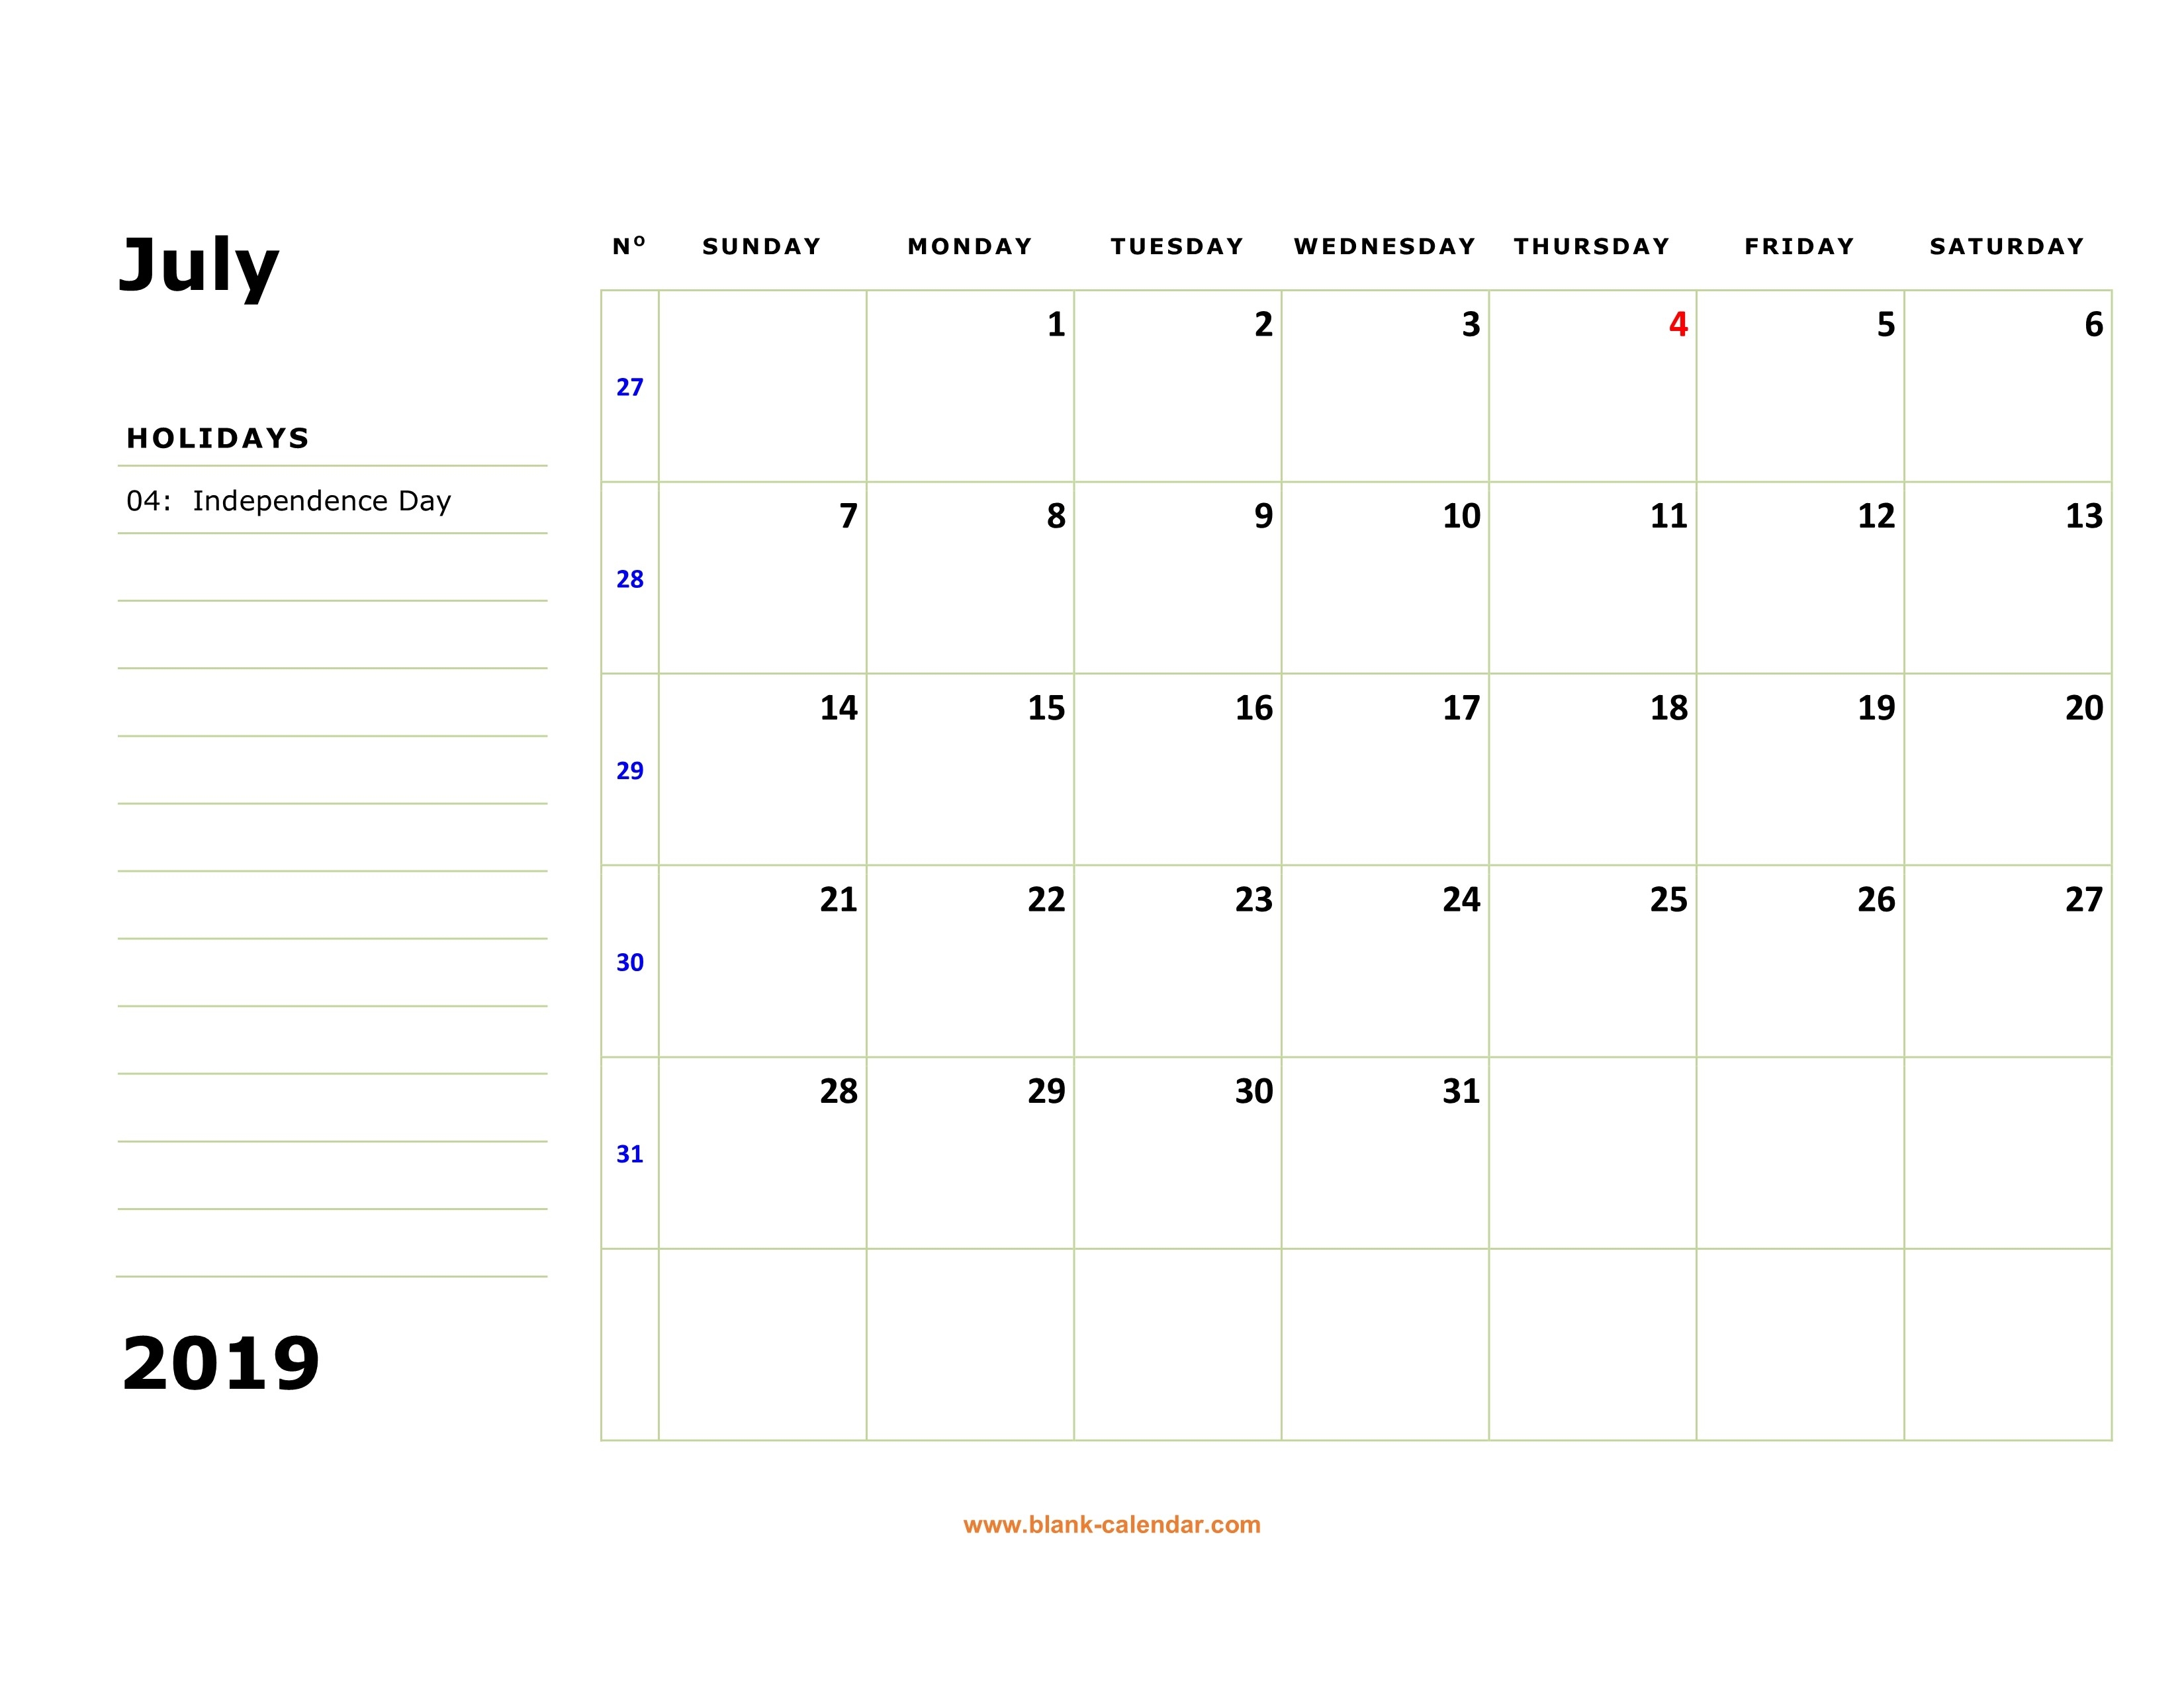 July 2019 Blank Calendar Pdf - Free August 2019 Calendar-Free Blanks Calendar Printable With Notes And Lines